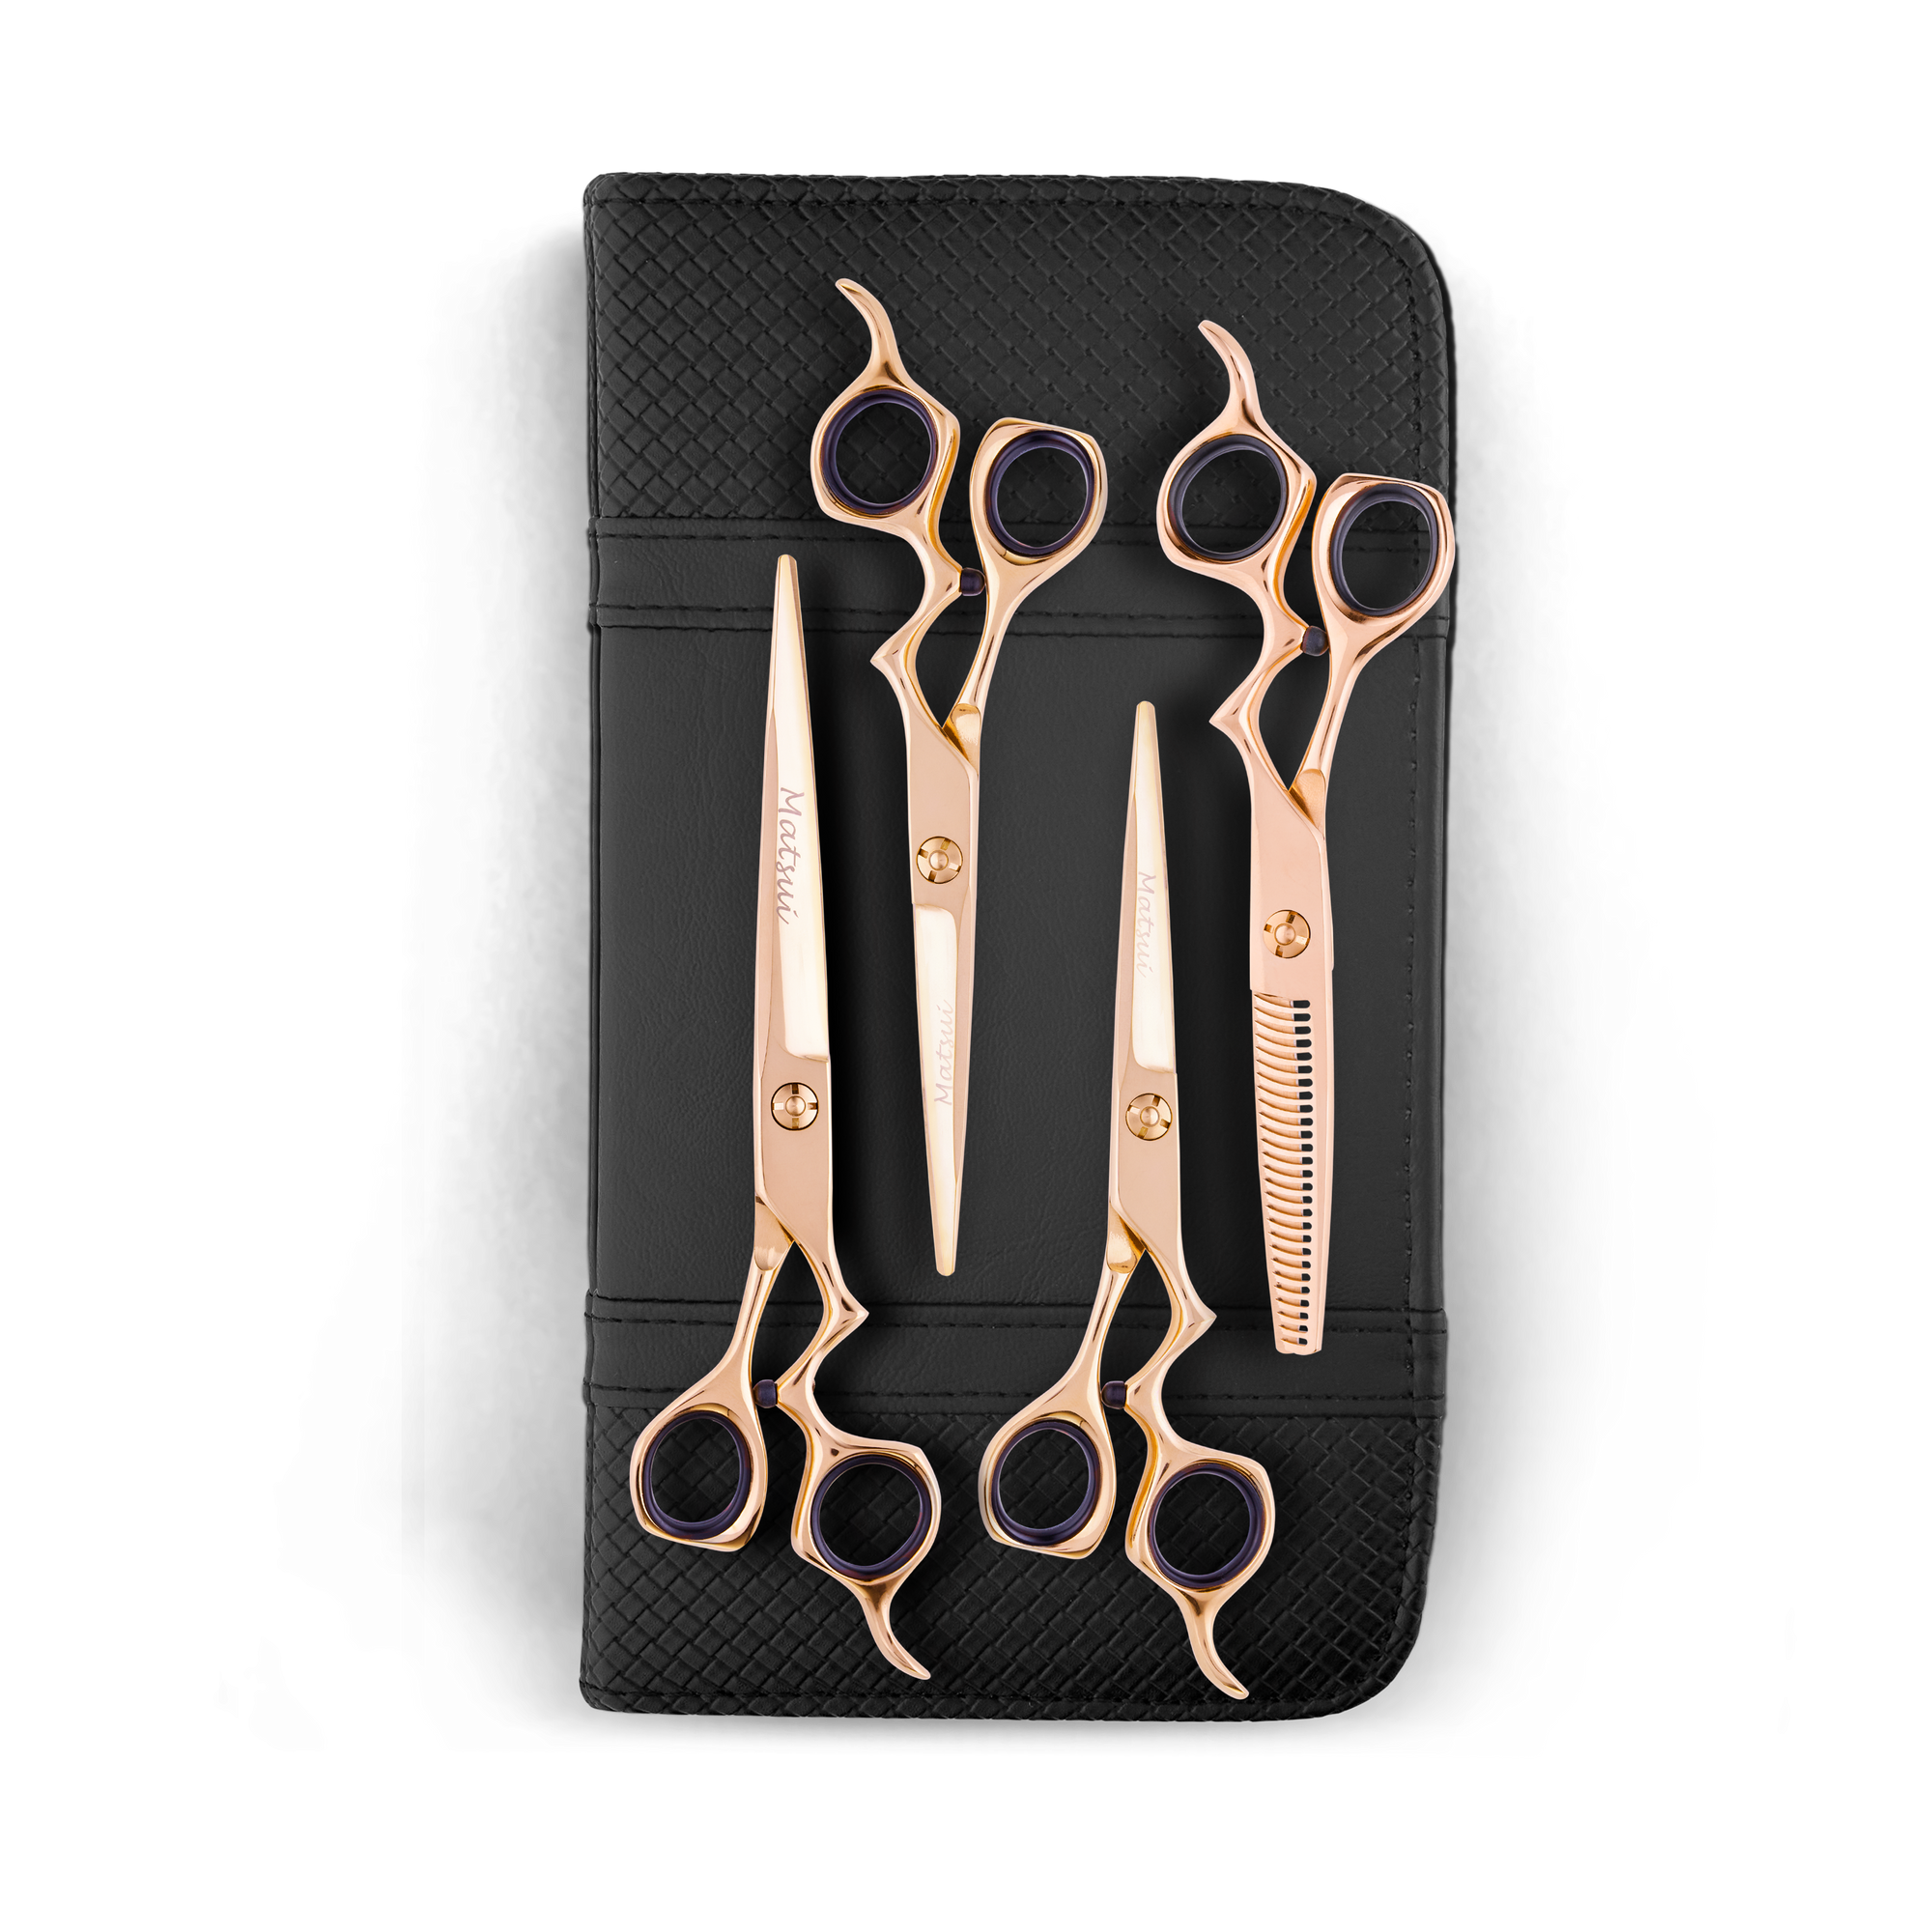 Matsui Classic Ergo Support Ultimate Barber Combo Rose Gold (4set) (6703983853634)